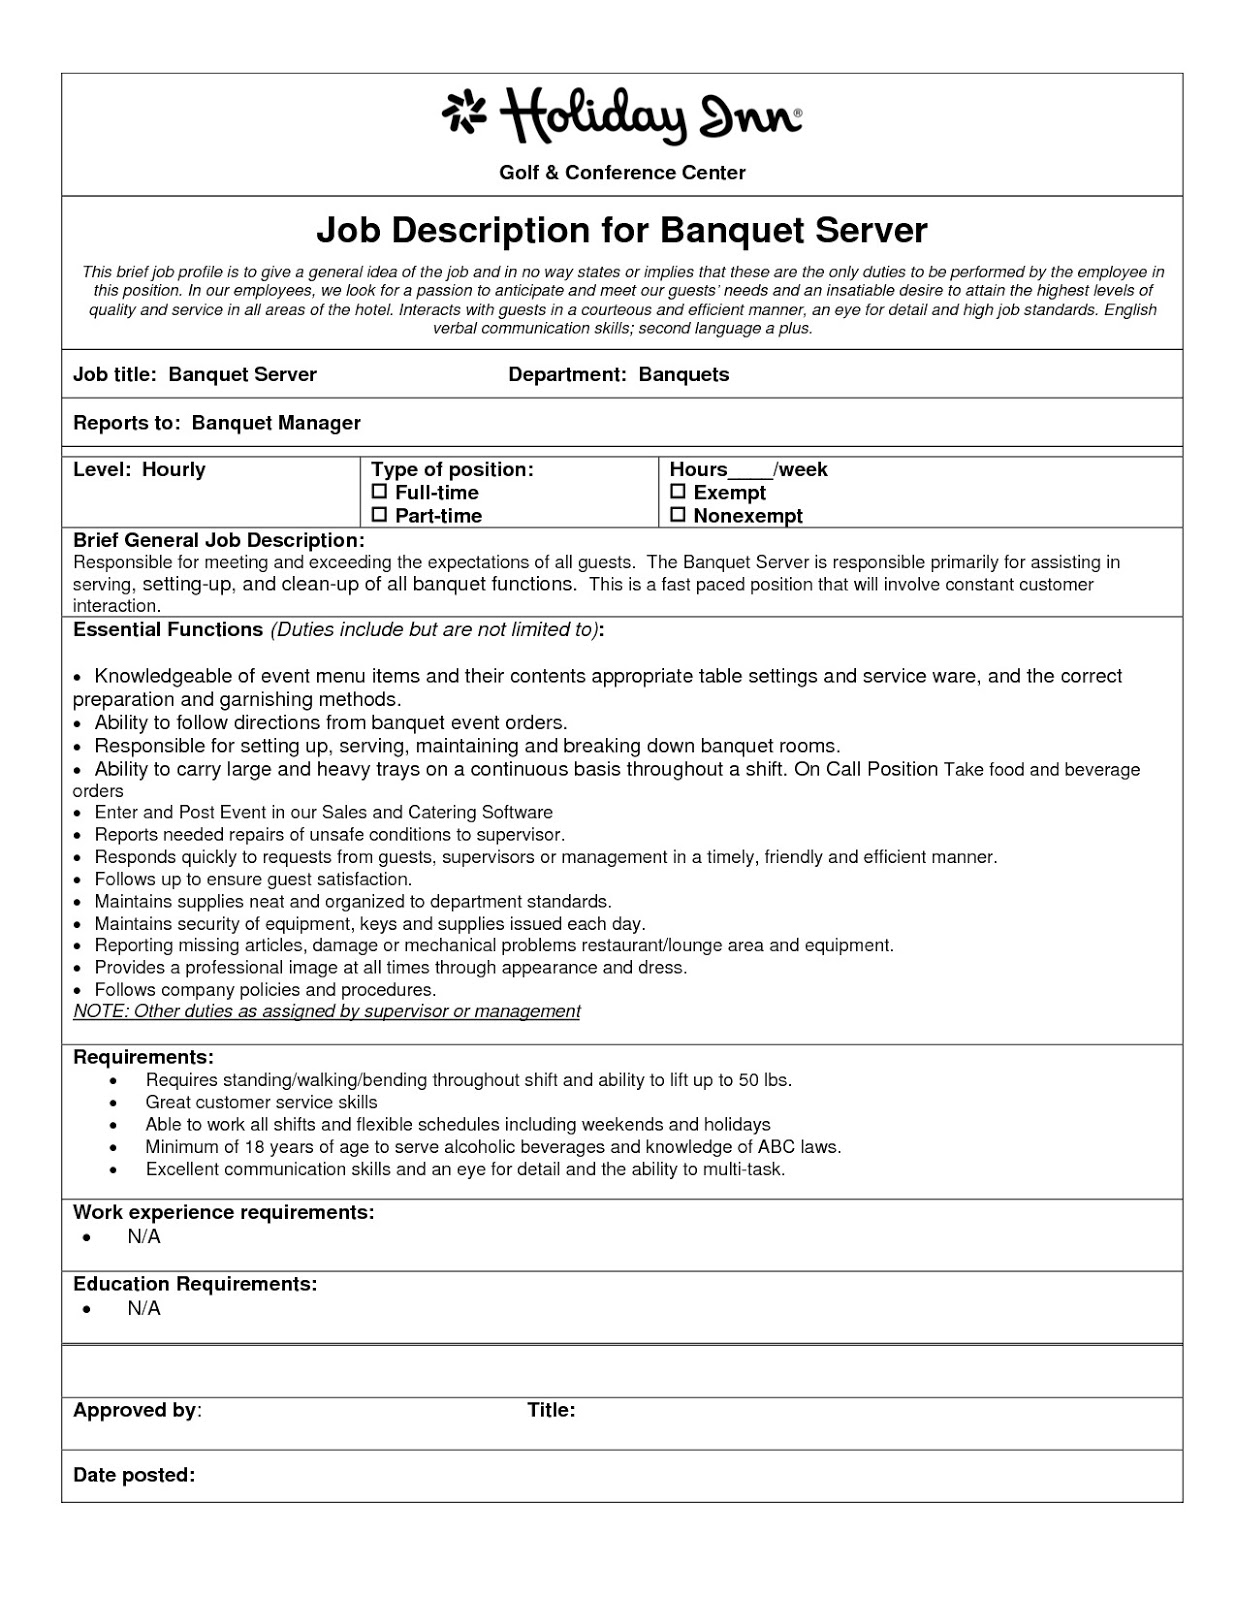 Banquet Captain Resume Samples 2019 Resume Examples 2020 banquet captain resume sample banquet captain duties resume banquet captain resume examples banquet captain job description for resume banquet captain job description resume banquet captain resume objective